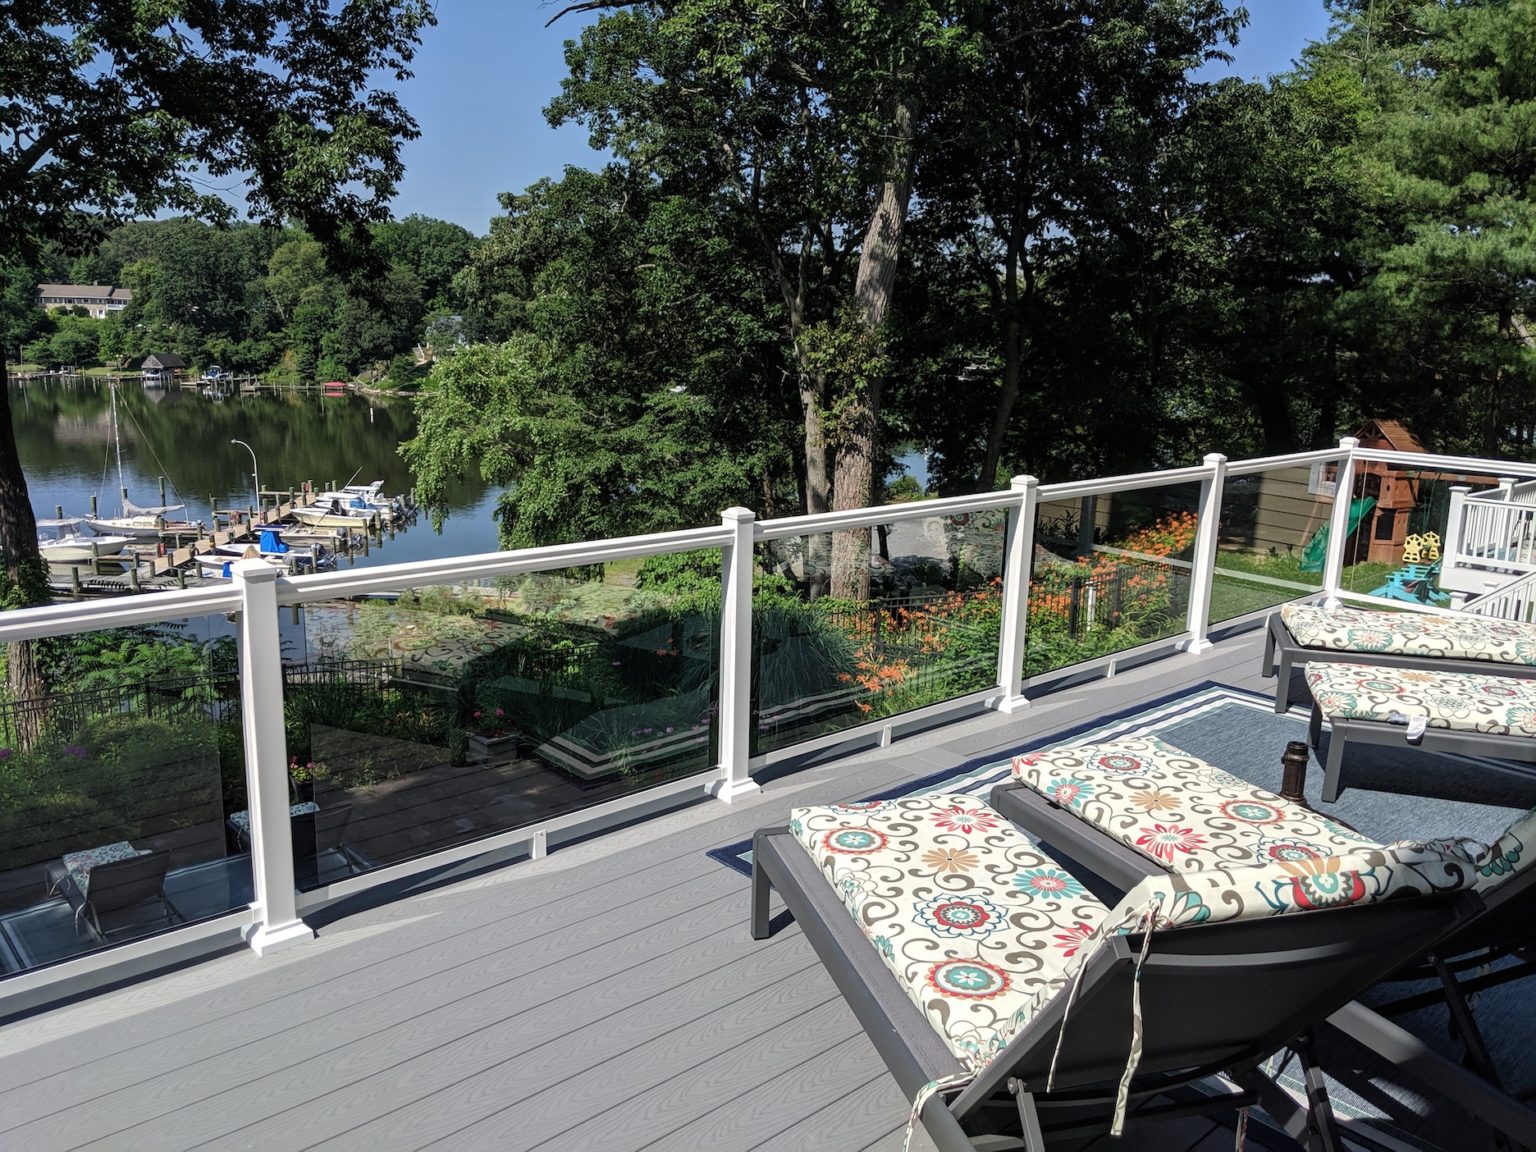 Trex Select Pebble Gray Decking With White Ultralox Aluminum Railing With Full Glass Panel Infills In Severna Park MD 1536x1152 